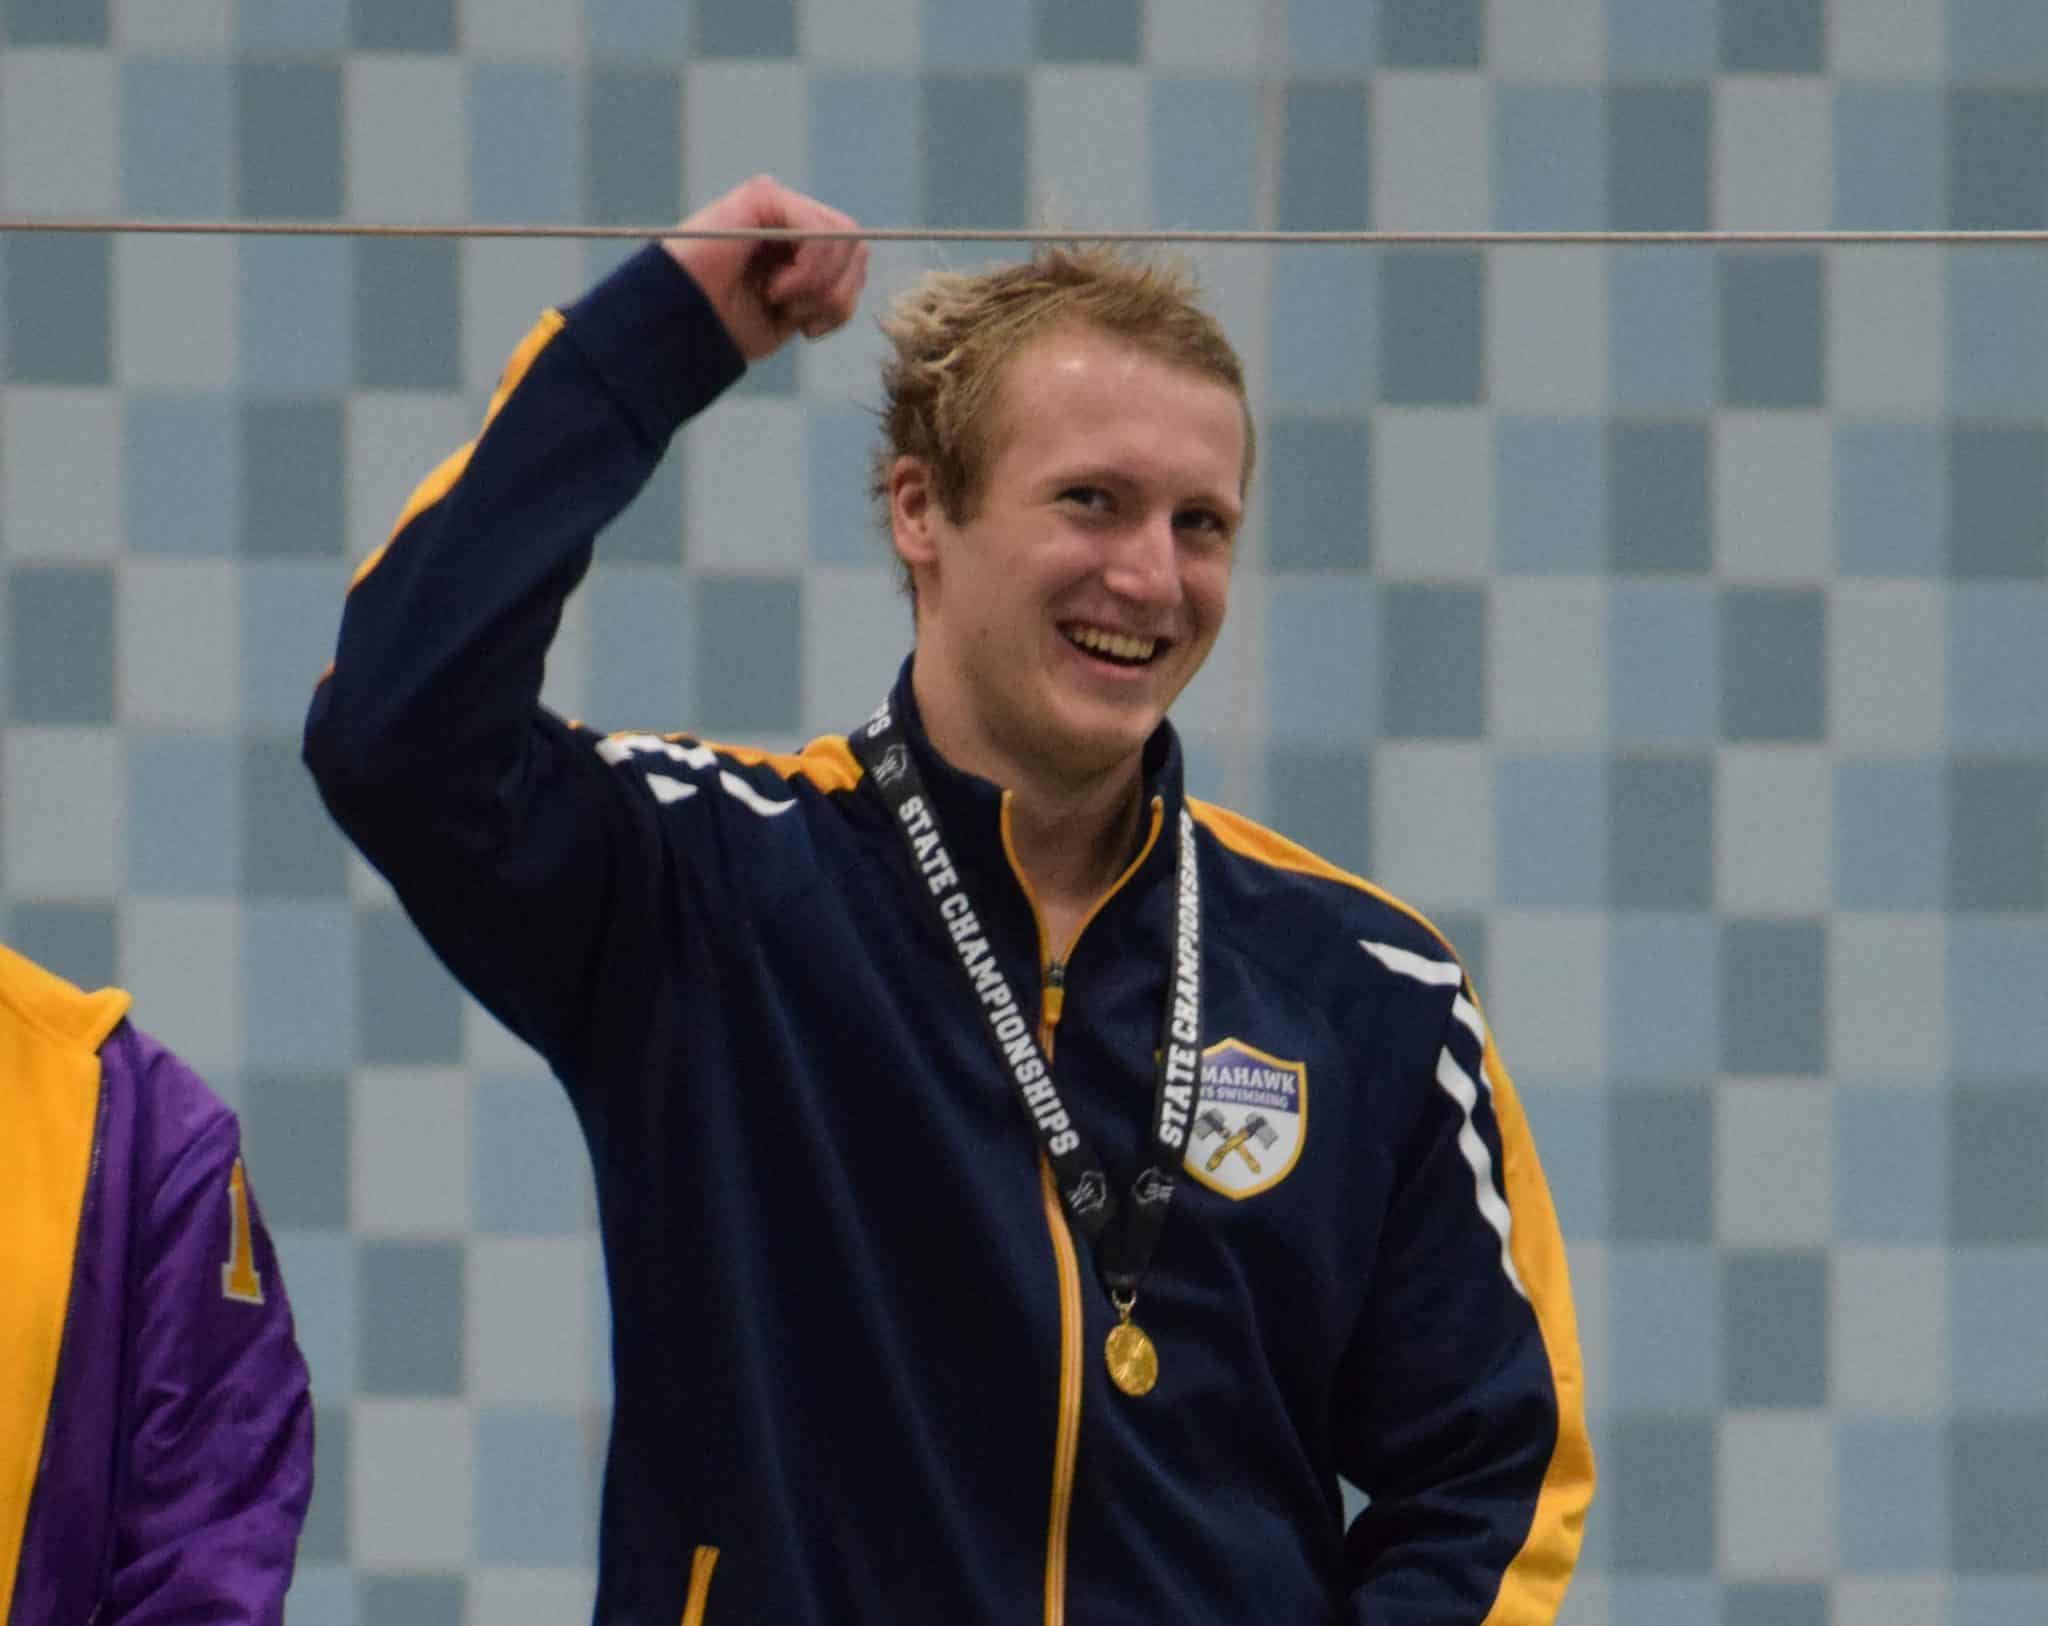 Travis Phillips wins 50 Free to become Tomahawk’s first State Swim Champion: Hatchet boys’ swim team scores 52 points in Madison for 17th place